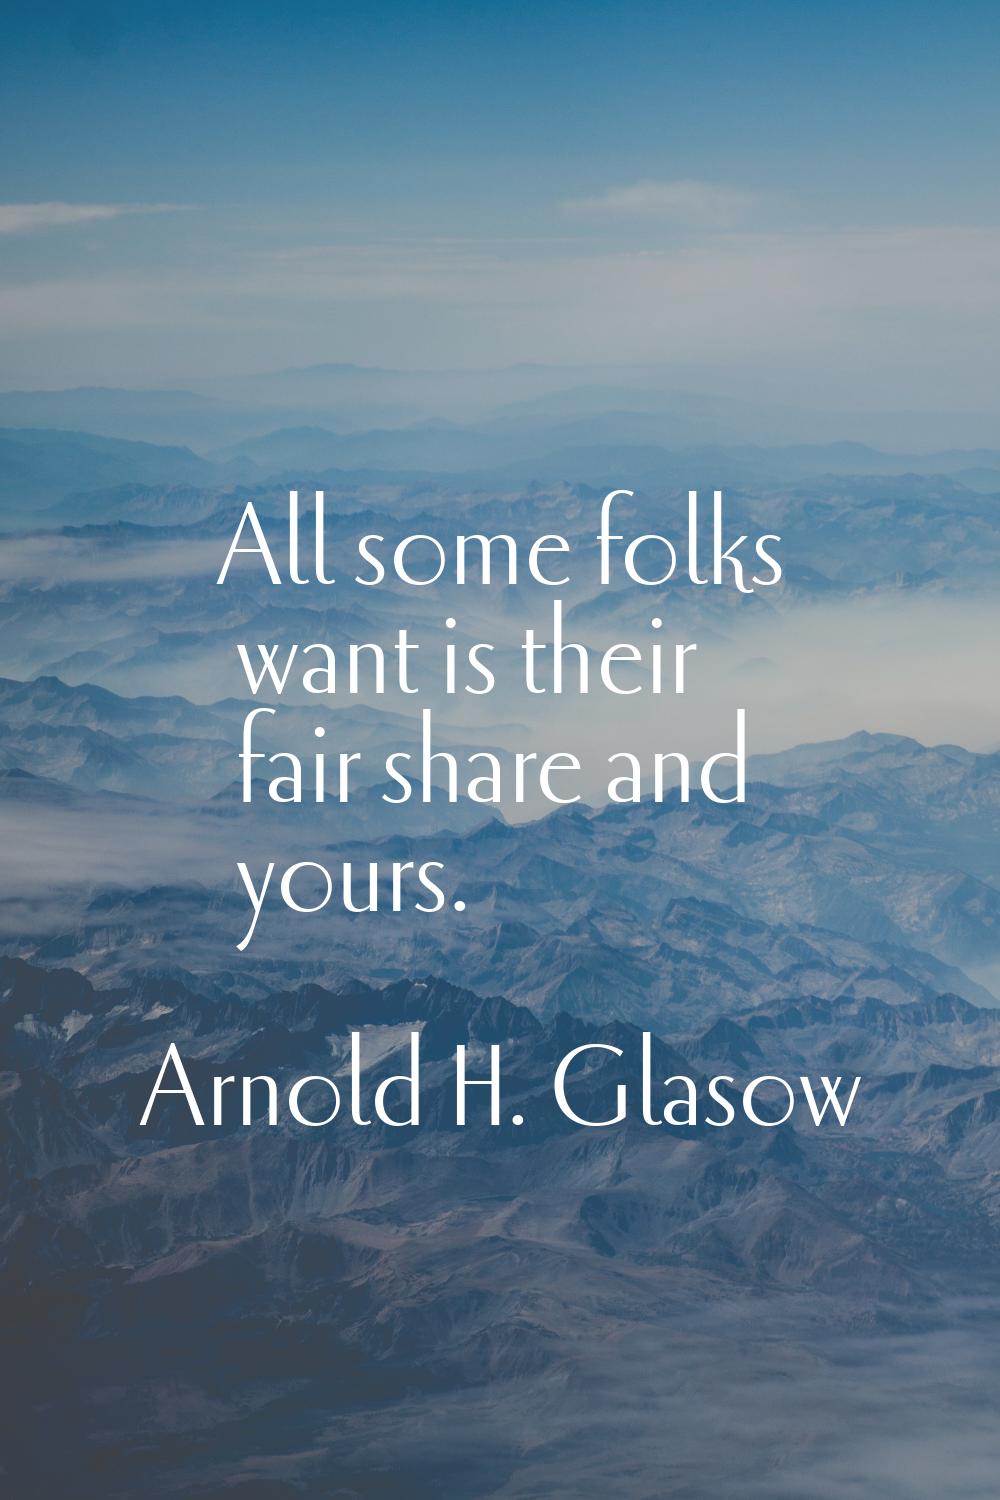 All some folks want is their fair share and yours.